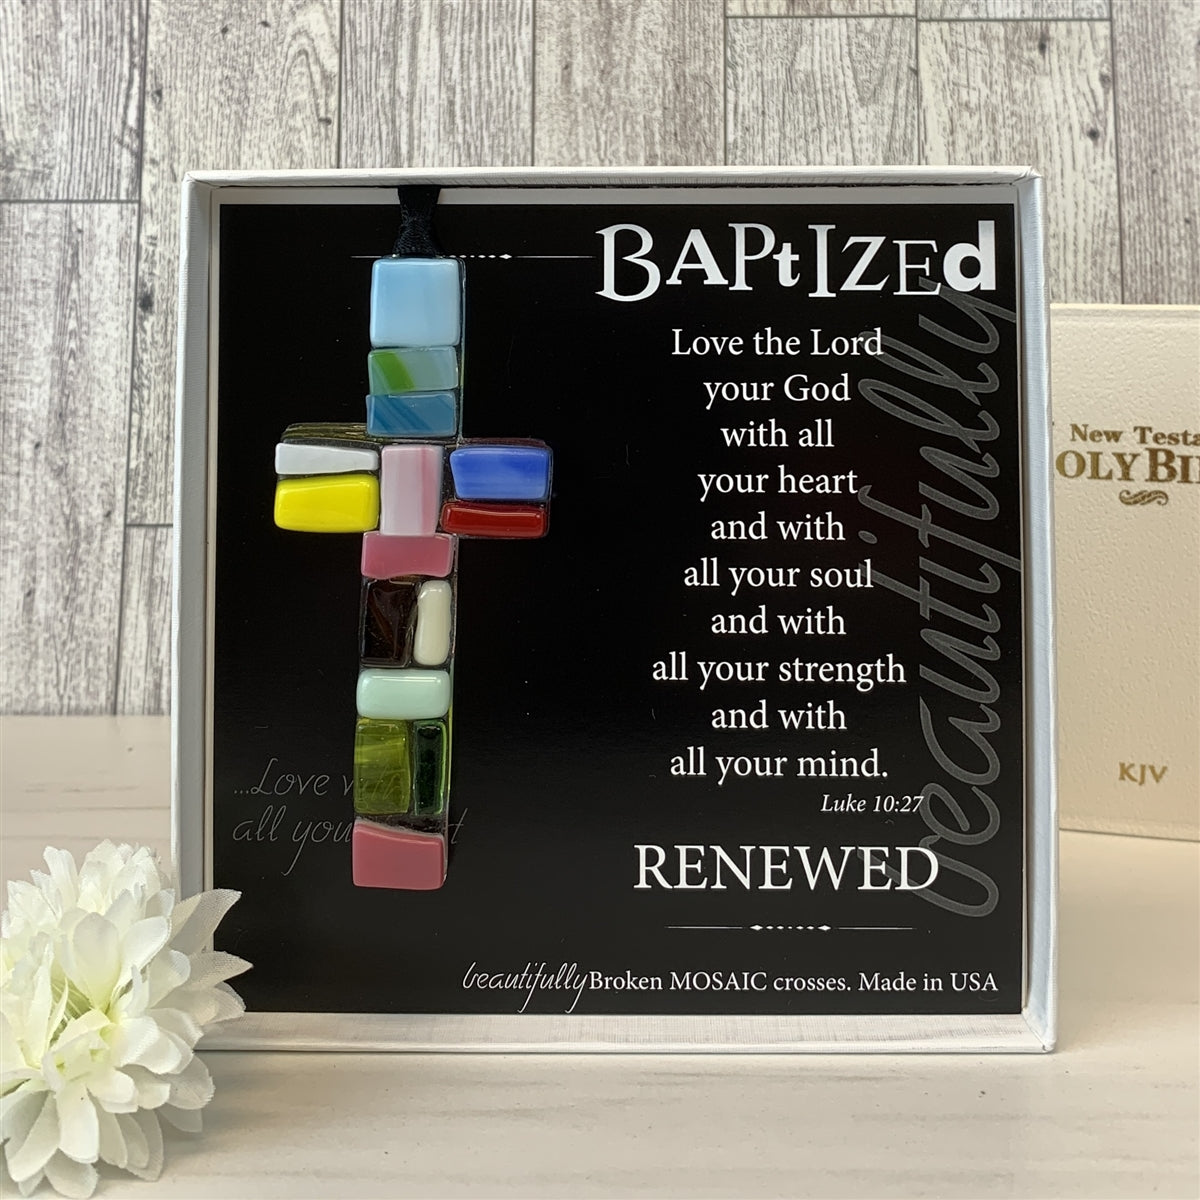 Baptized glass mosaic cross with bible in background.